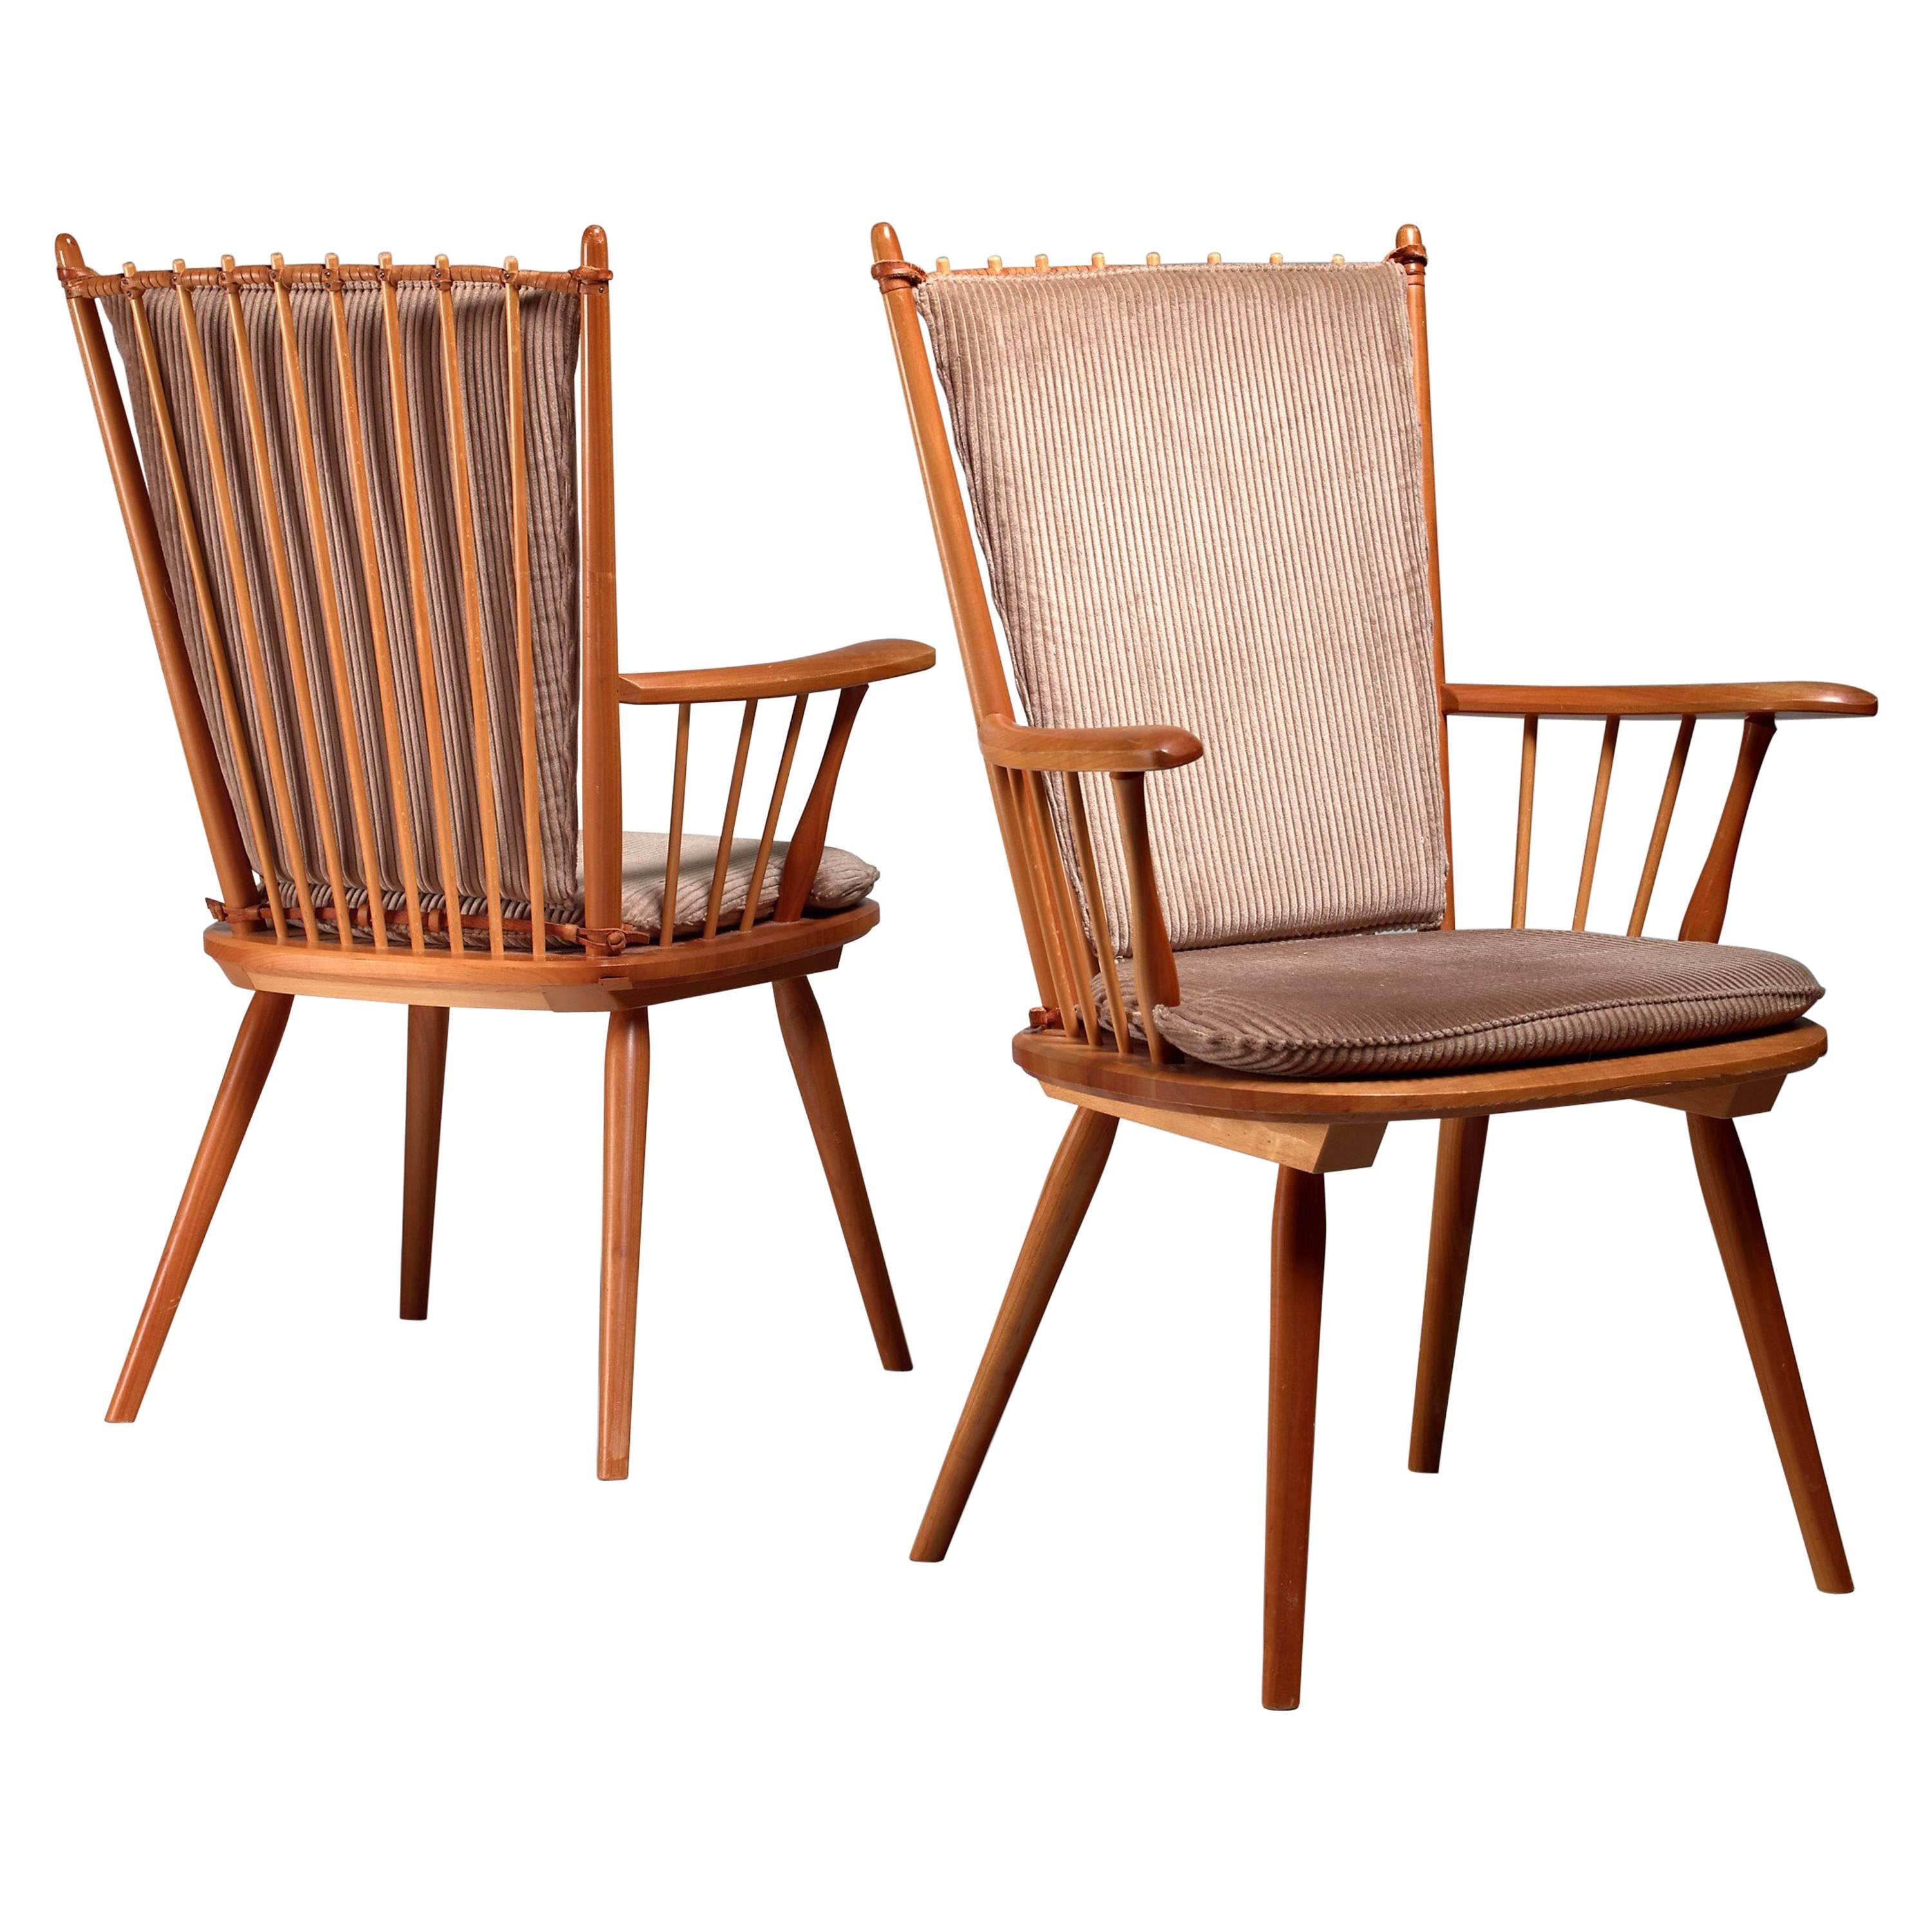 Albert Haberer Pair of Arts and Crafts Chairs, Germany, circa 1950 For Sale